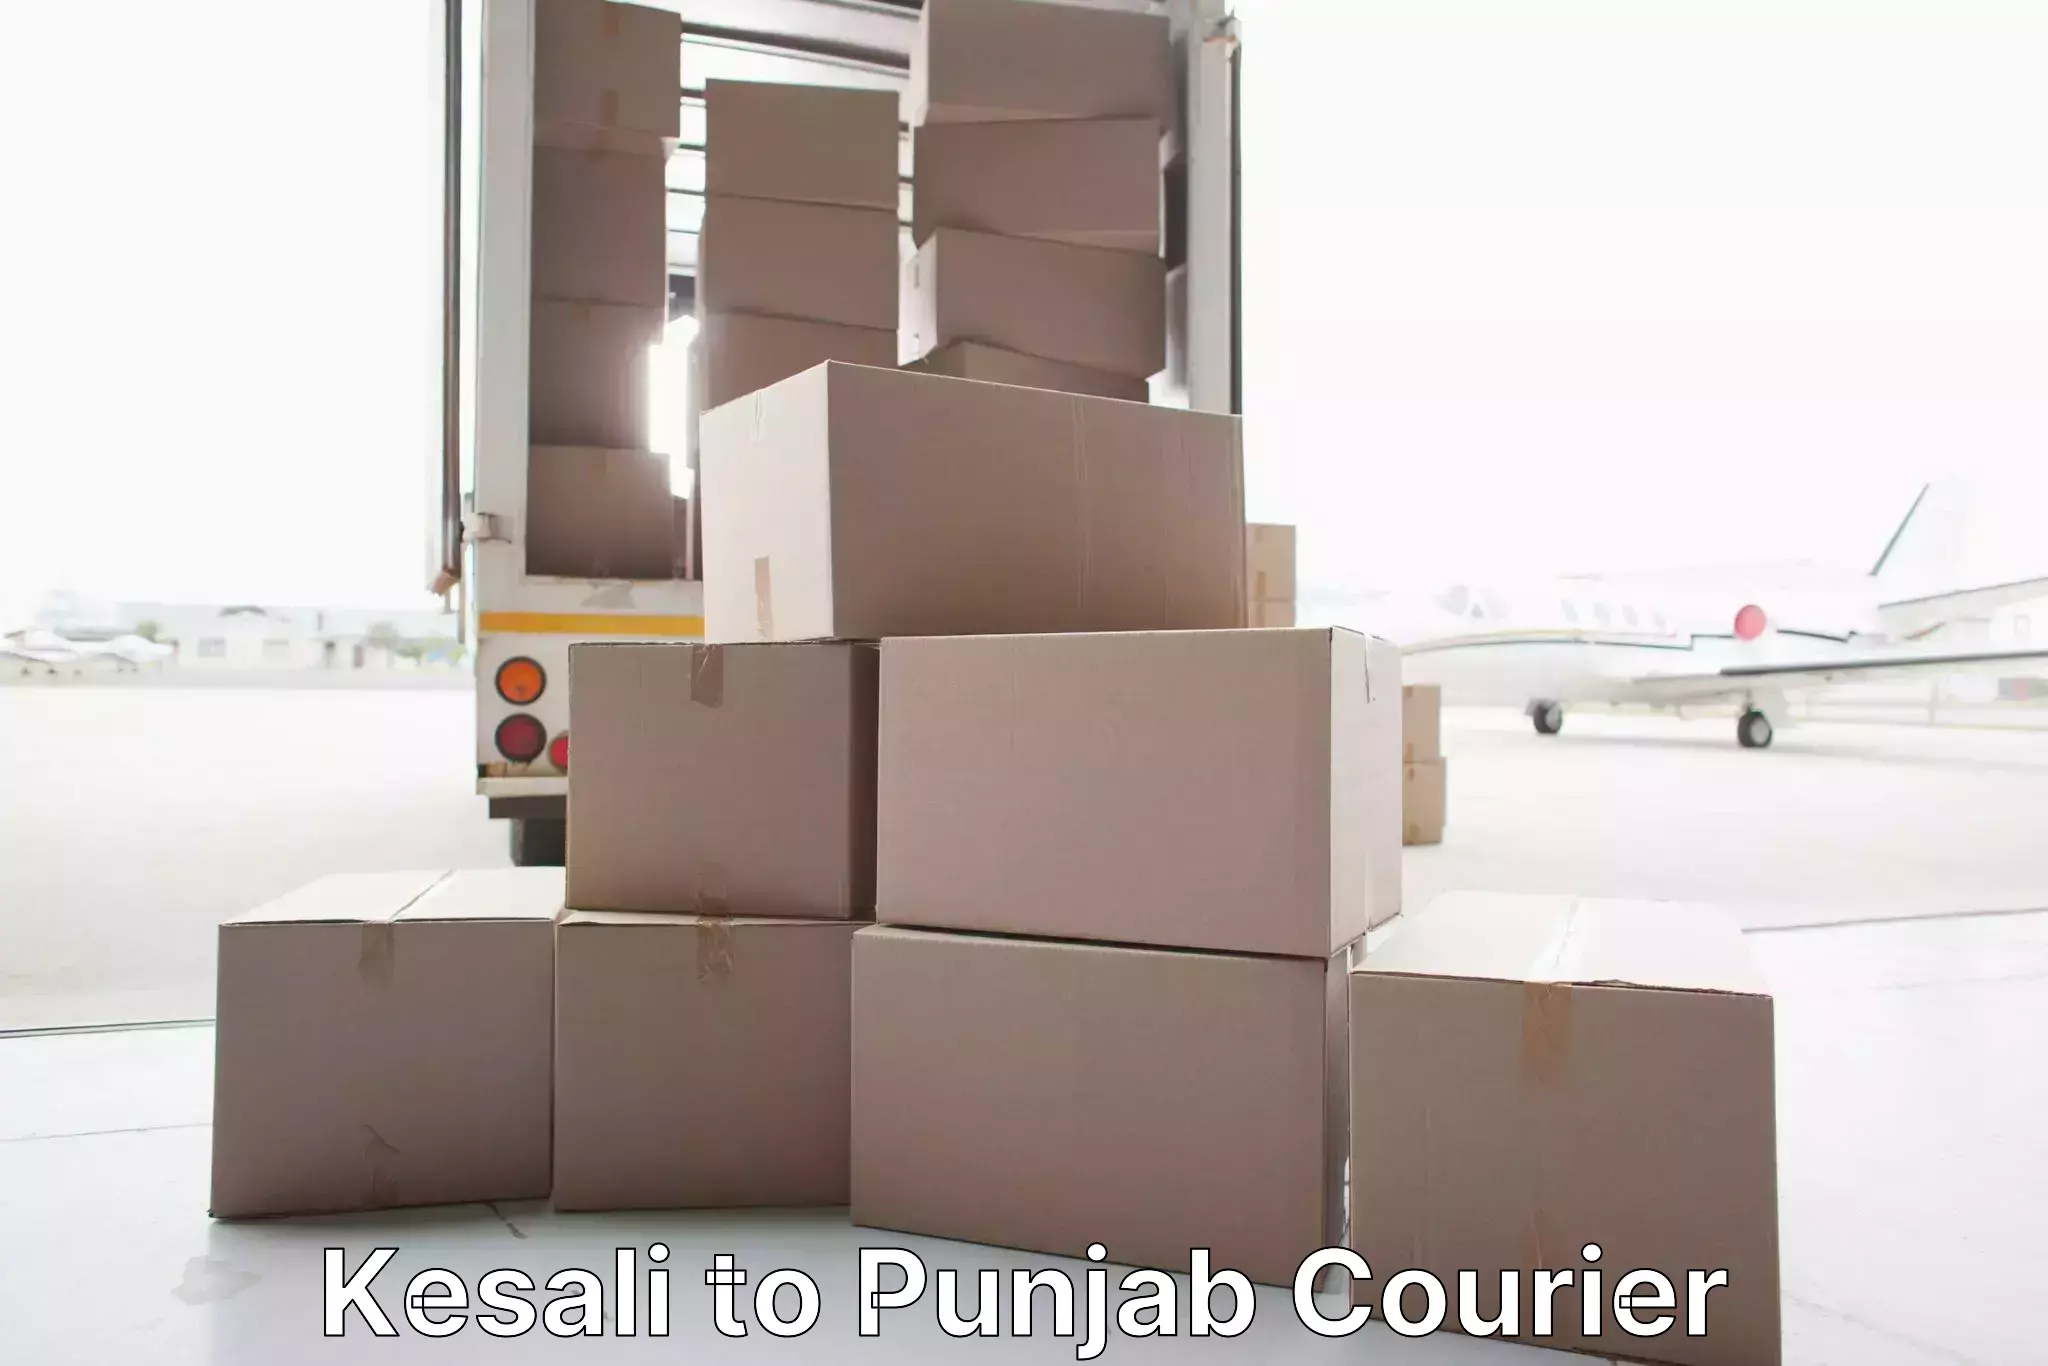 High-quality moving services Kesali to Punjab